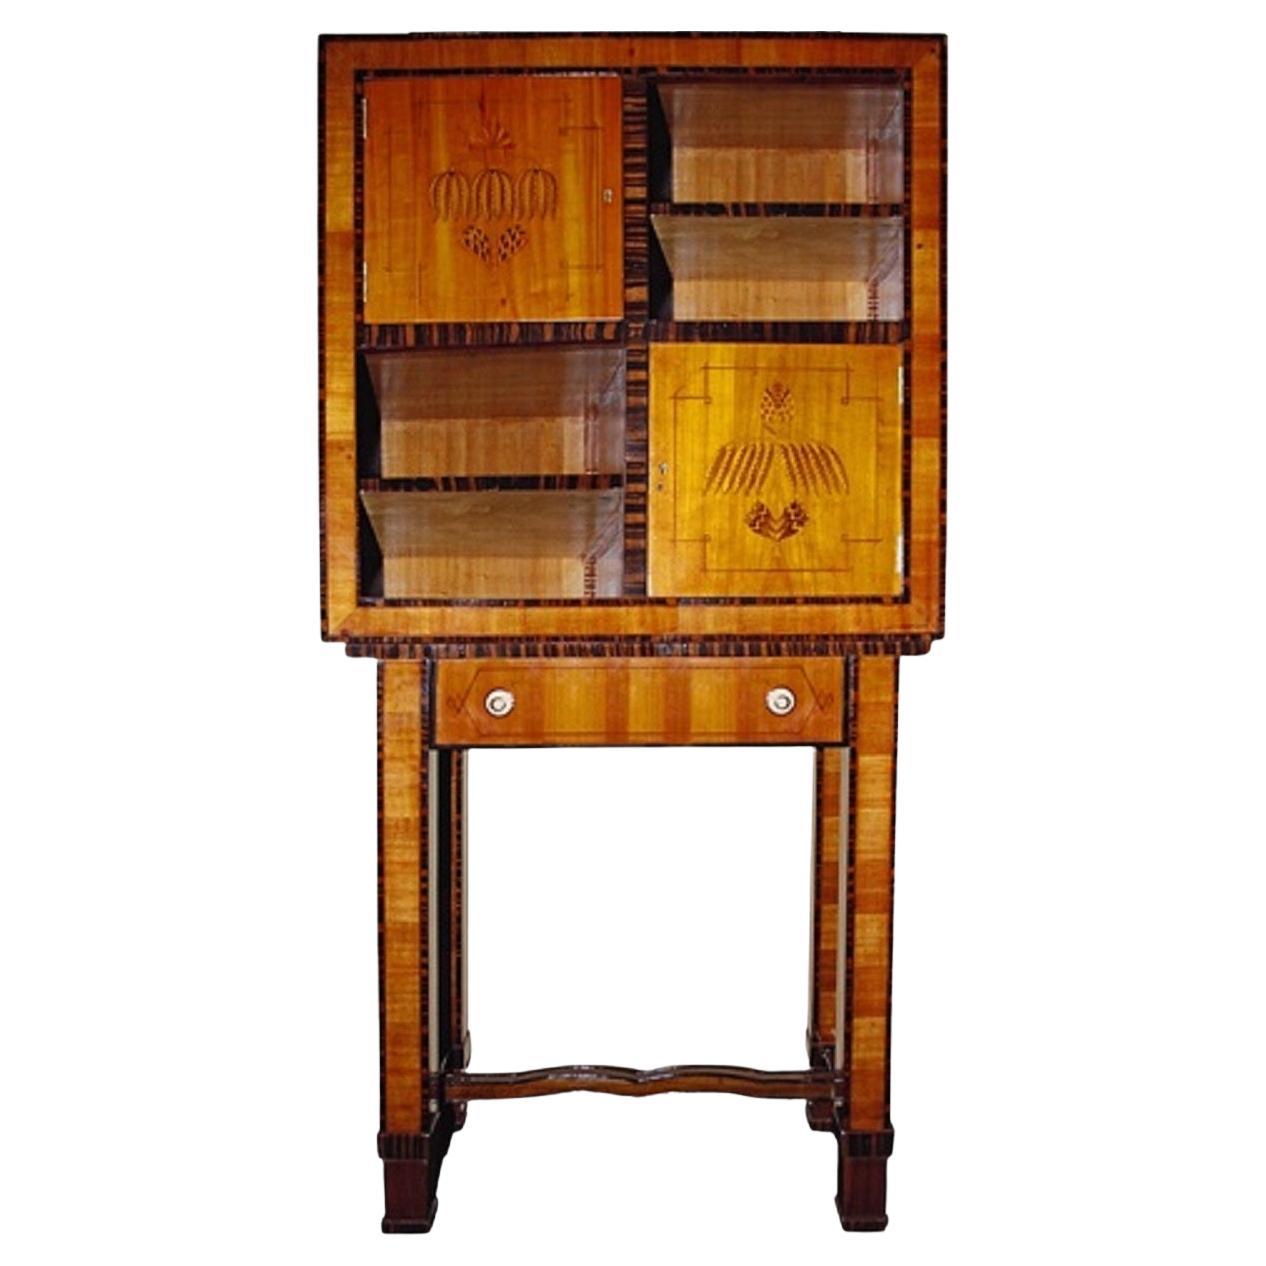 Furniture for Havana Cigars, Puros, Attributed to Koloman Moser and Werkstatte